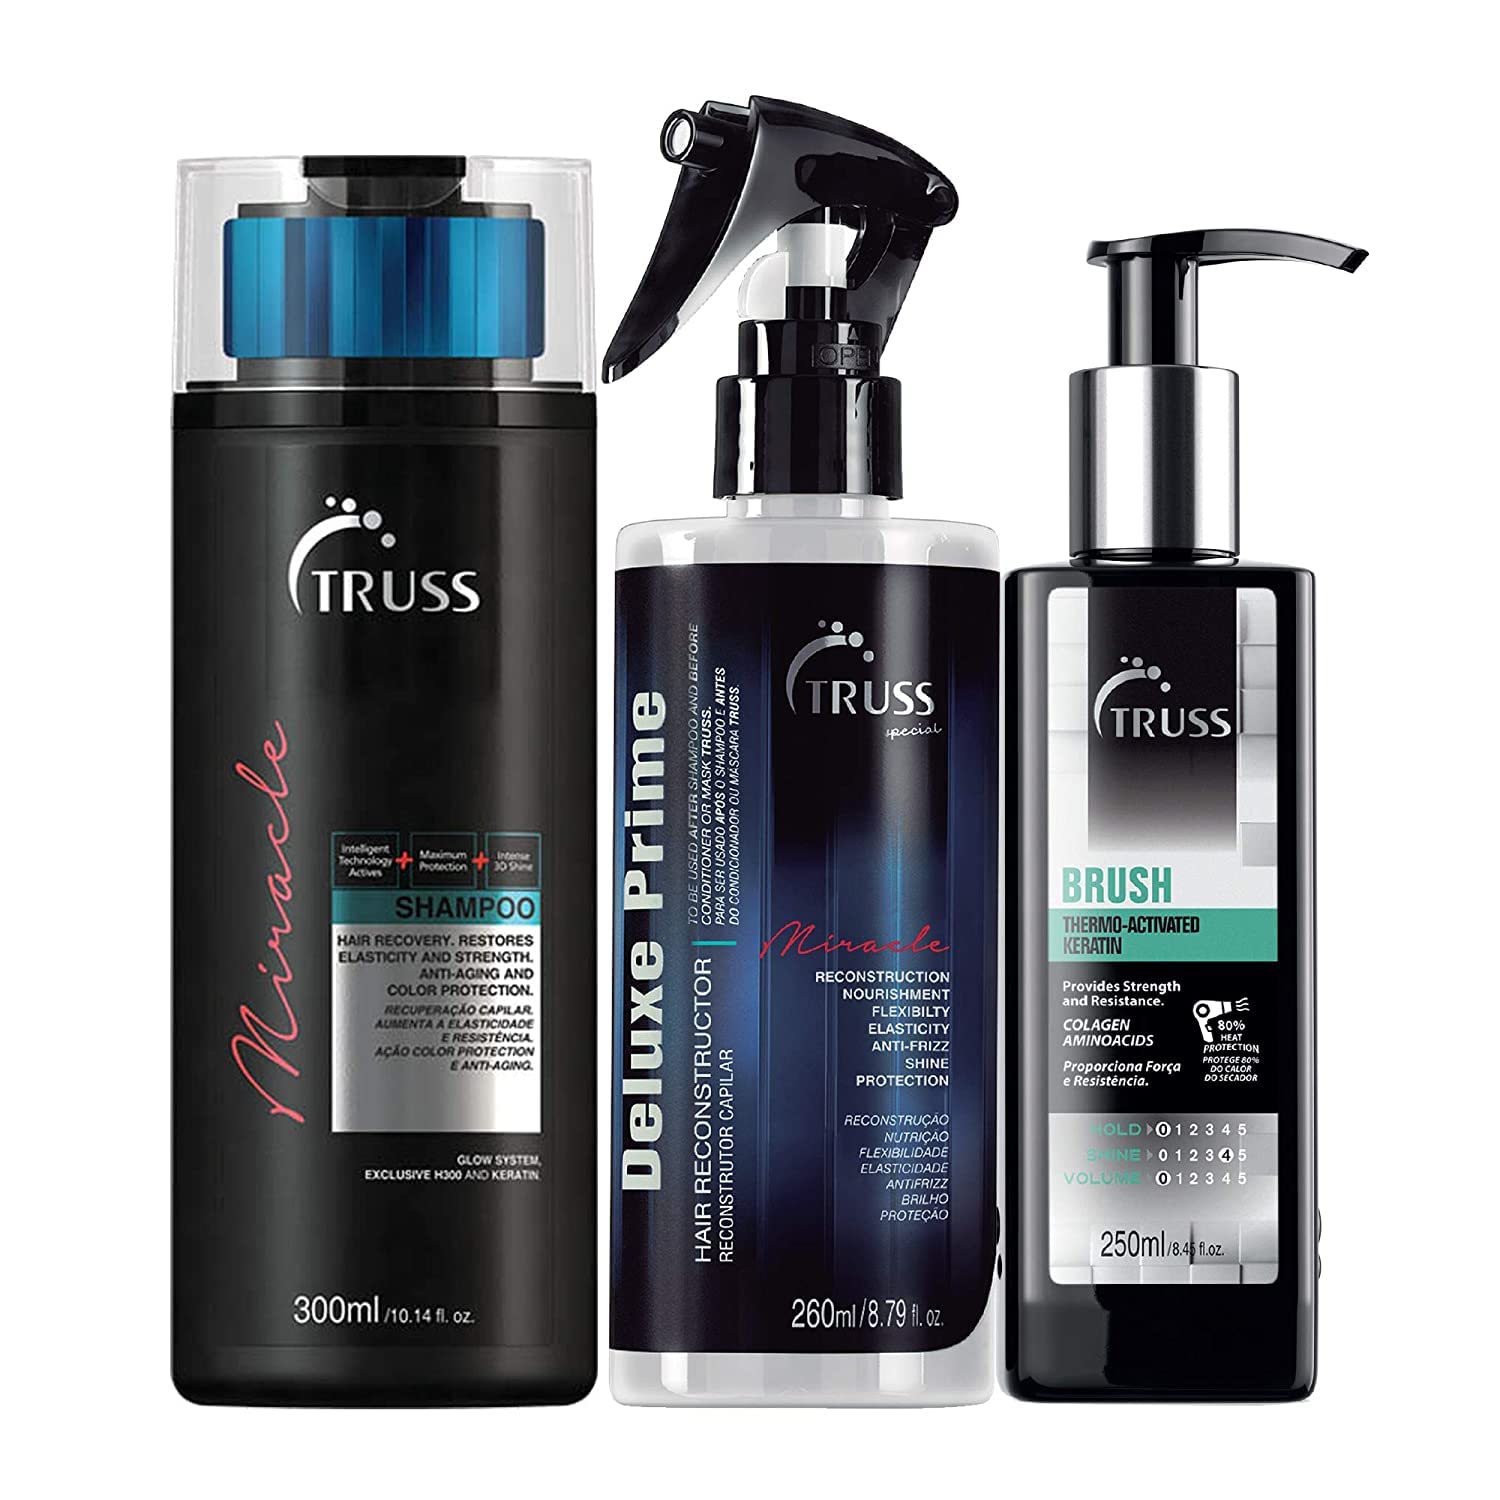 TRUSS Deluxe Prime Hair Treatment Bundle with Miracle Shampoo and Brush - Intensive Leave-in Hair Repair Treatment